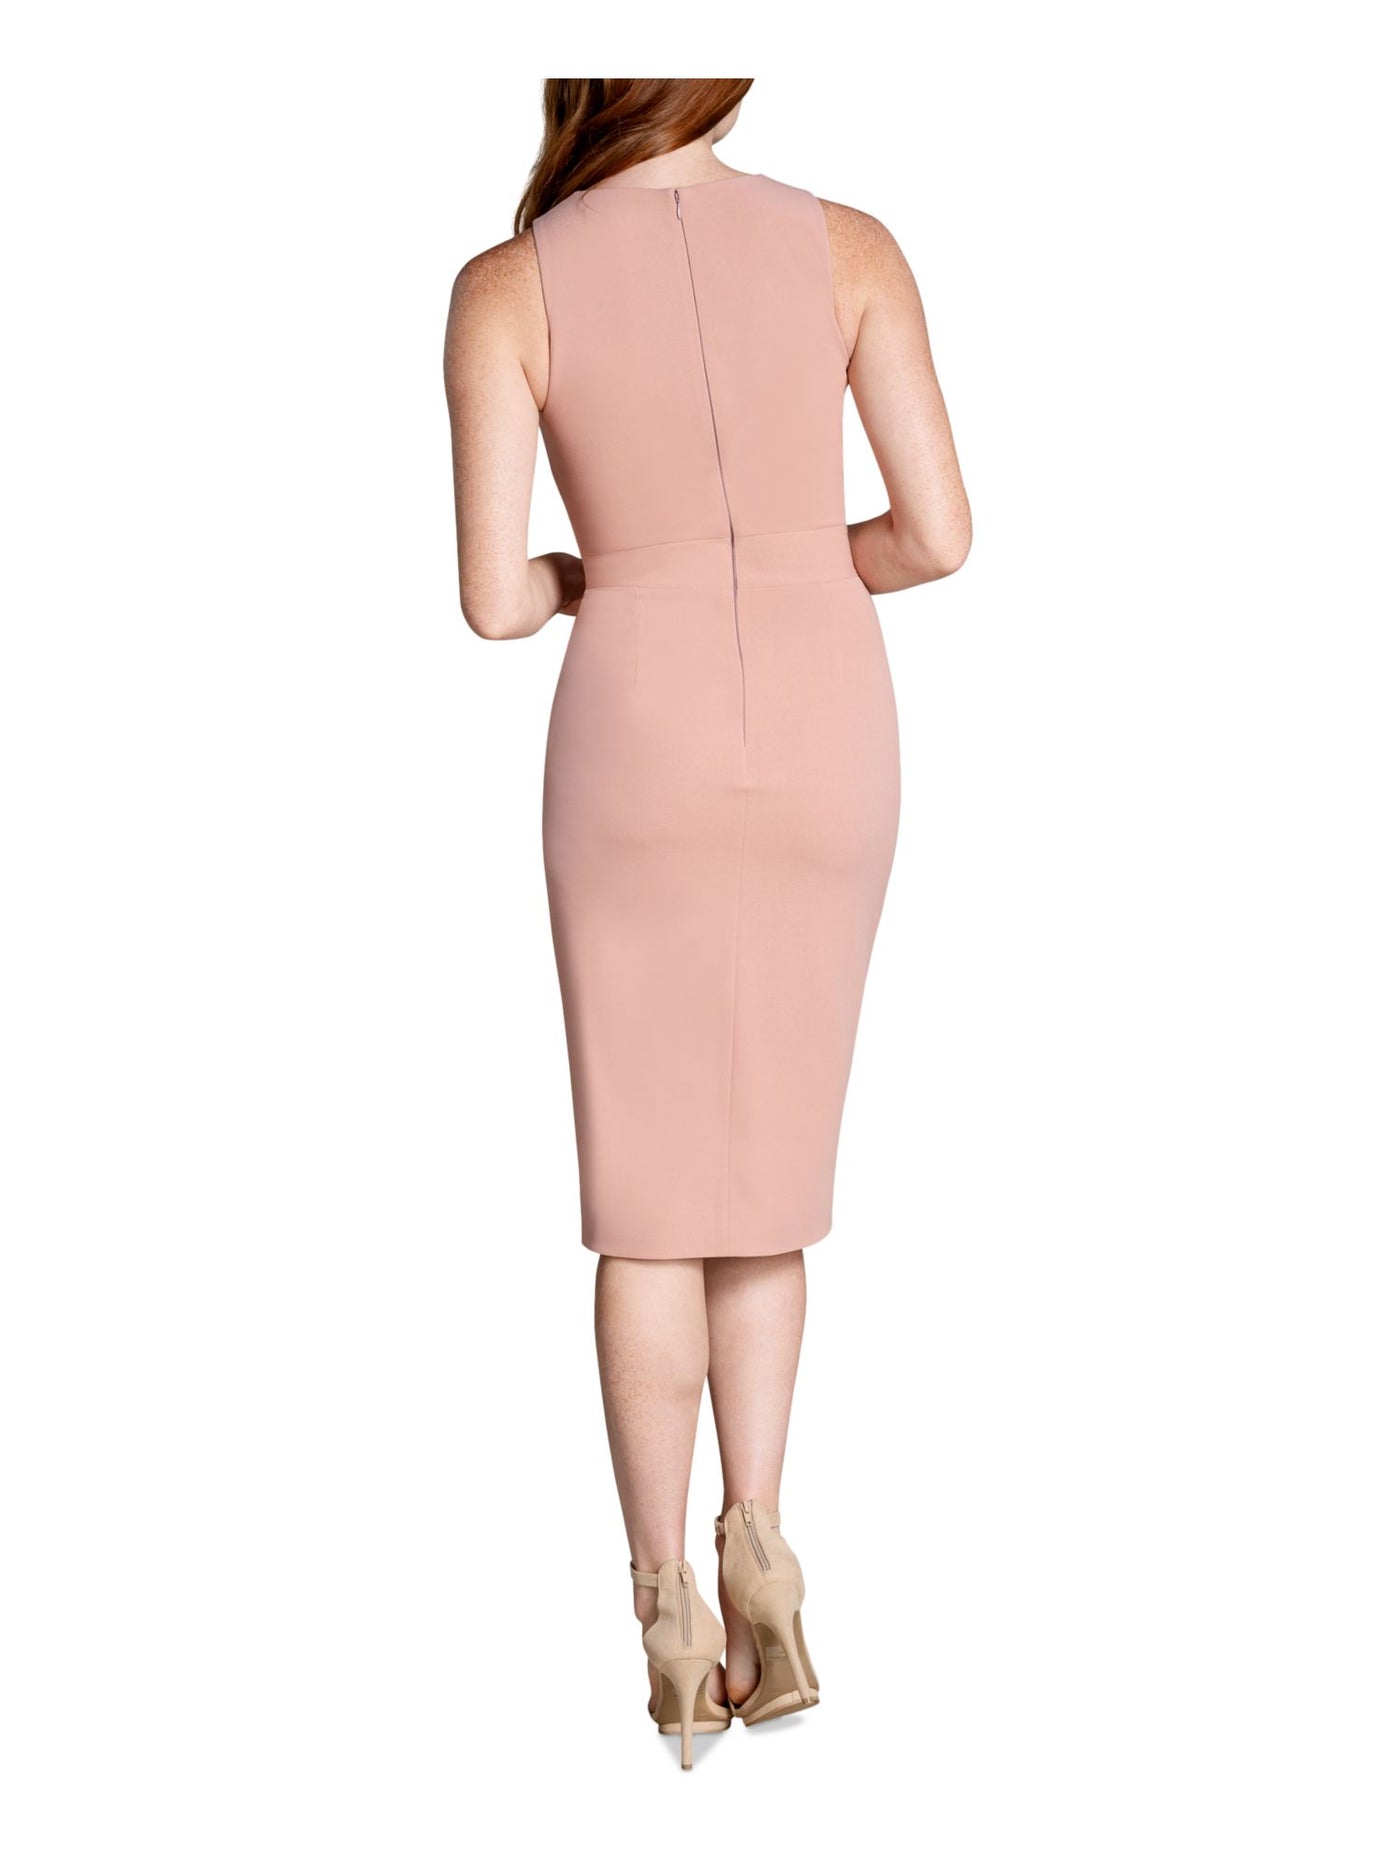 DRESS THE POPULATION Womens Pink Zippered Embellished Mesh Inset Lined Slitted Sleeveless Round Neck Knee Length Wear To Work Sheath Dress XL